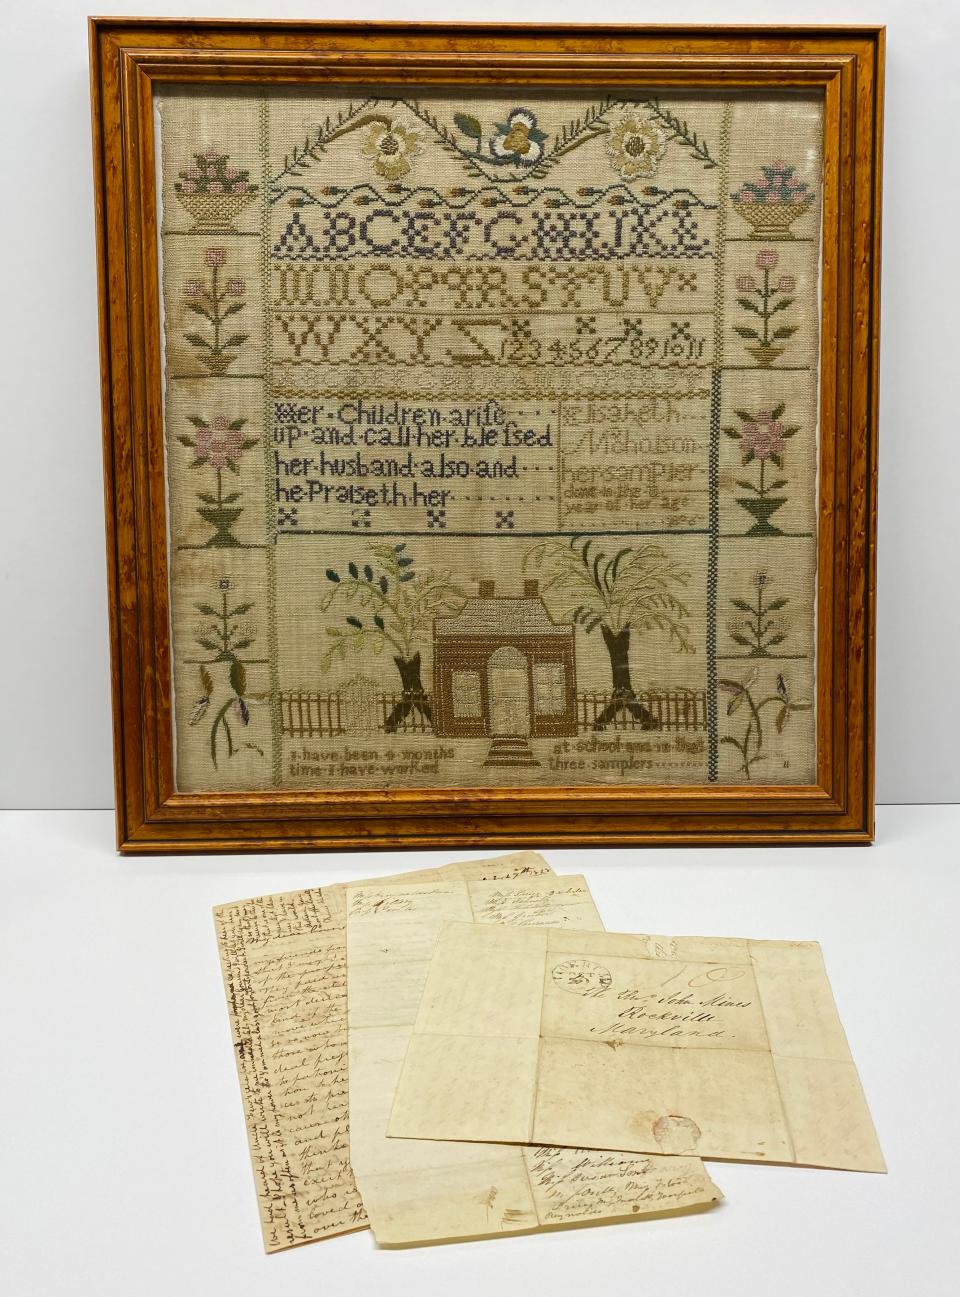 A sampler Elizabeth Nicholson might have stitched during her youth is among the items in the Washington County Historical Society's collection, along with her correspondence.